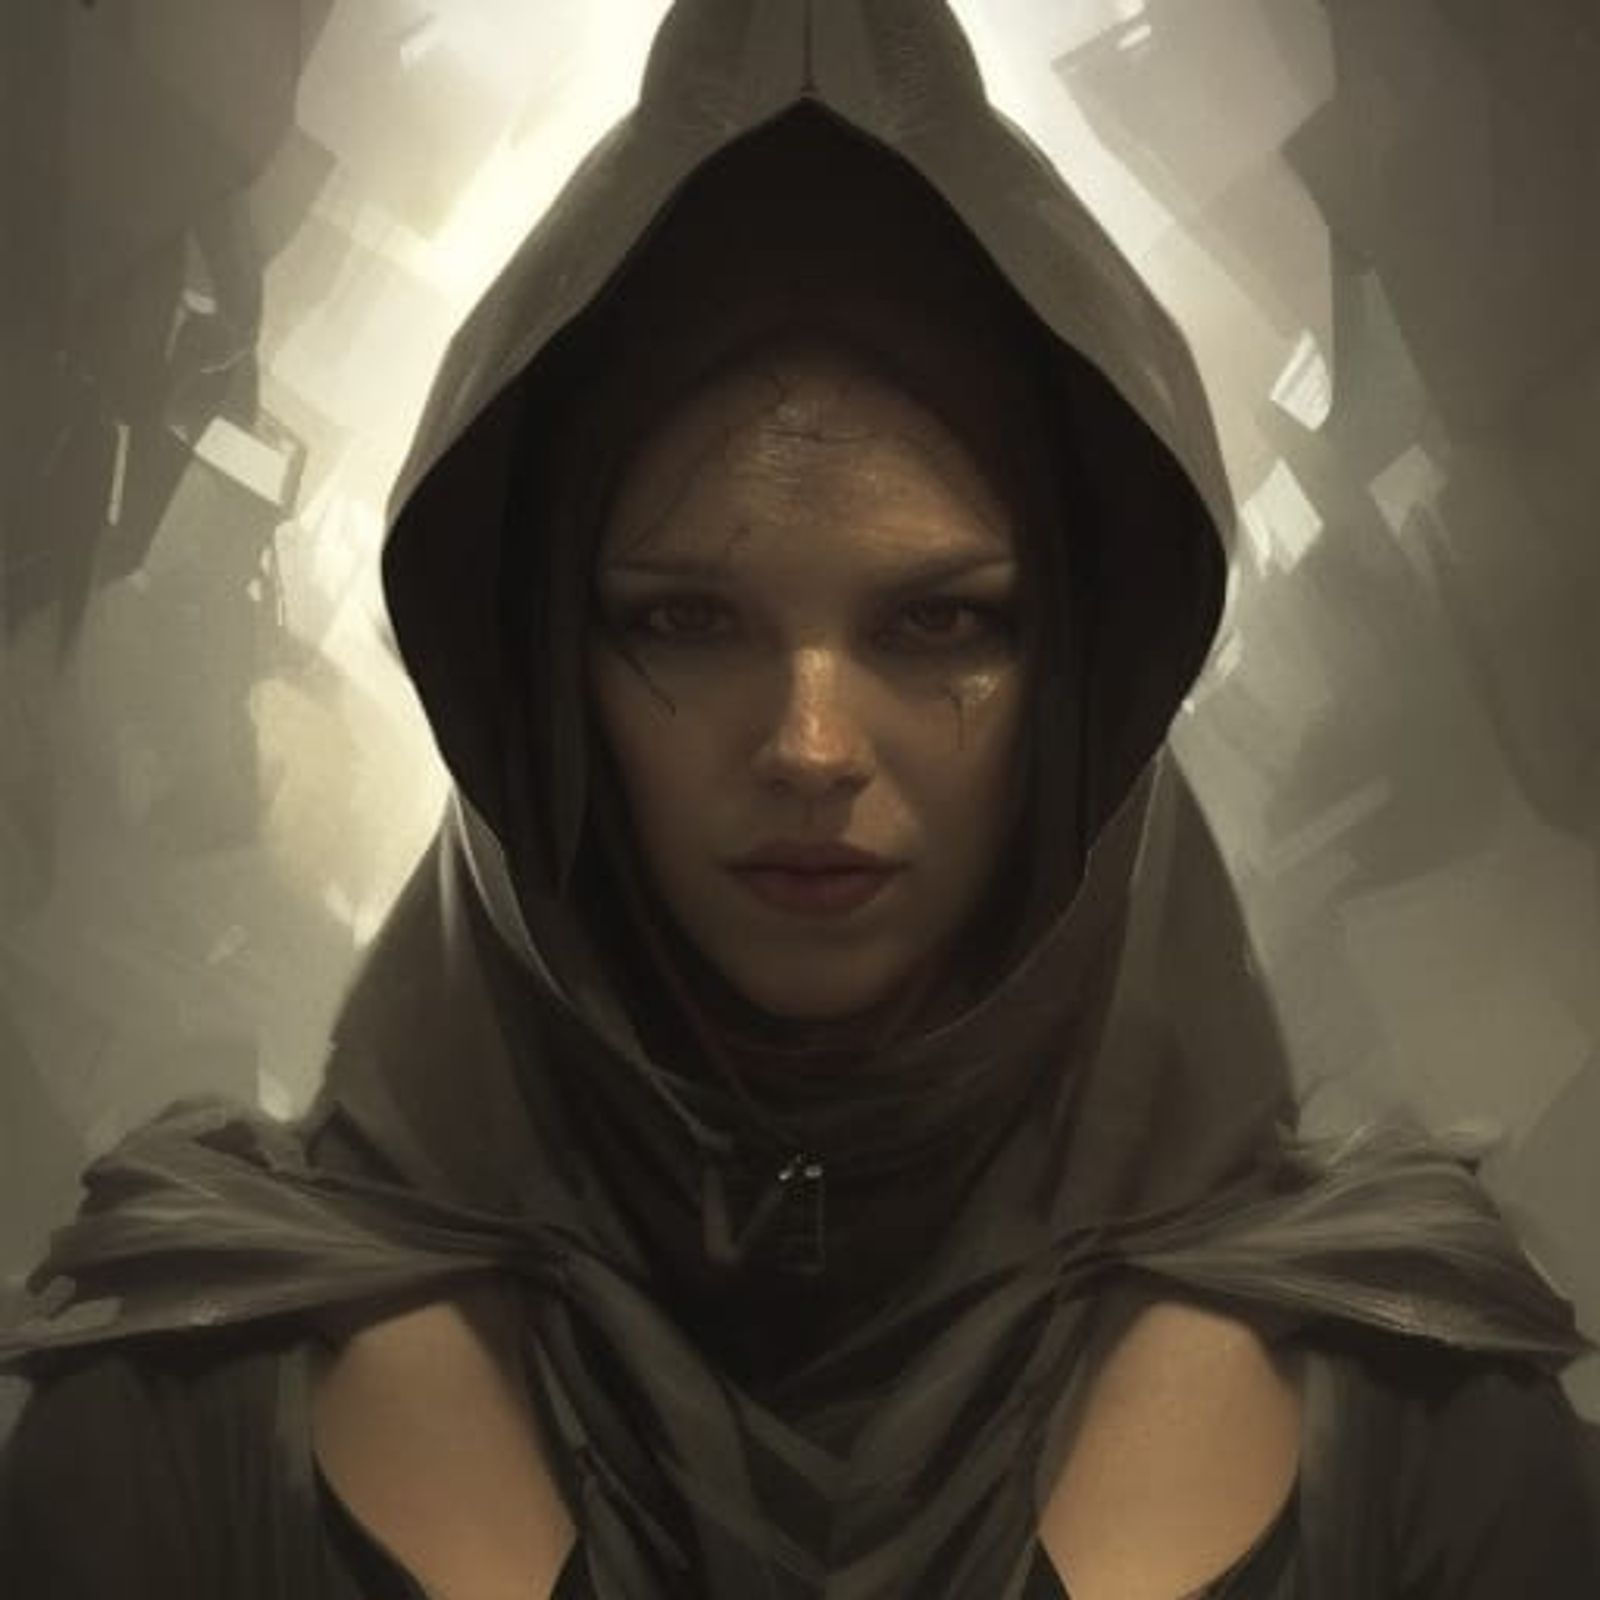 hooded female archer